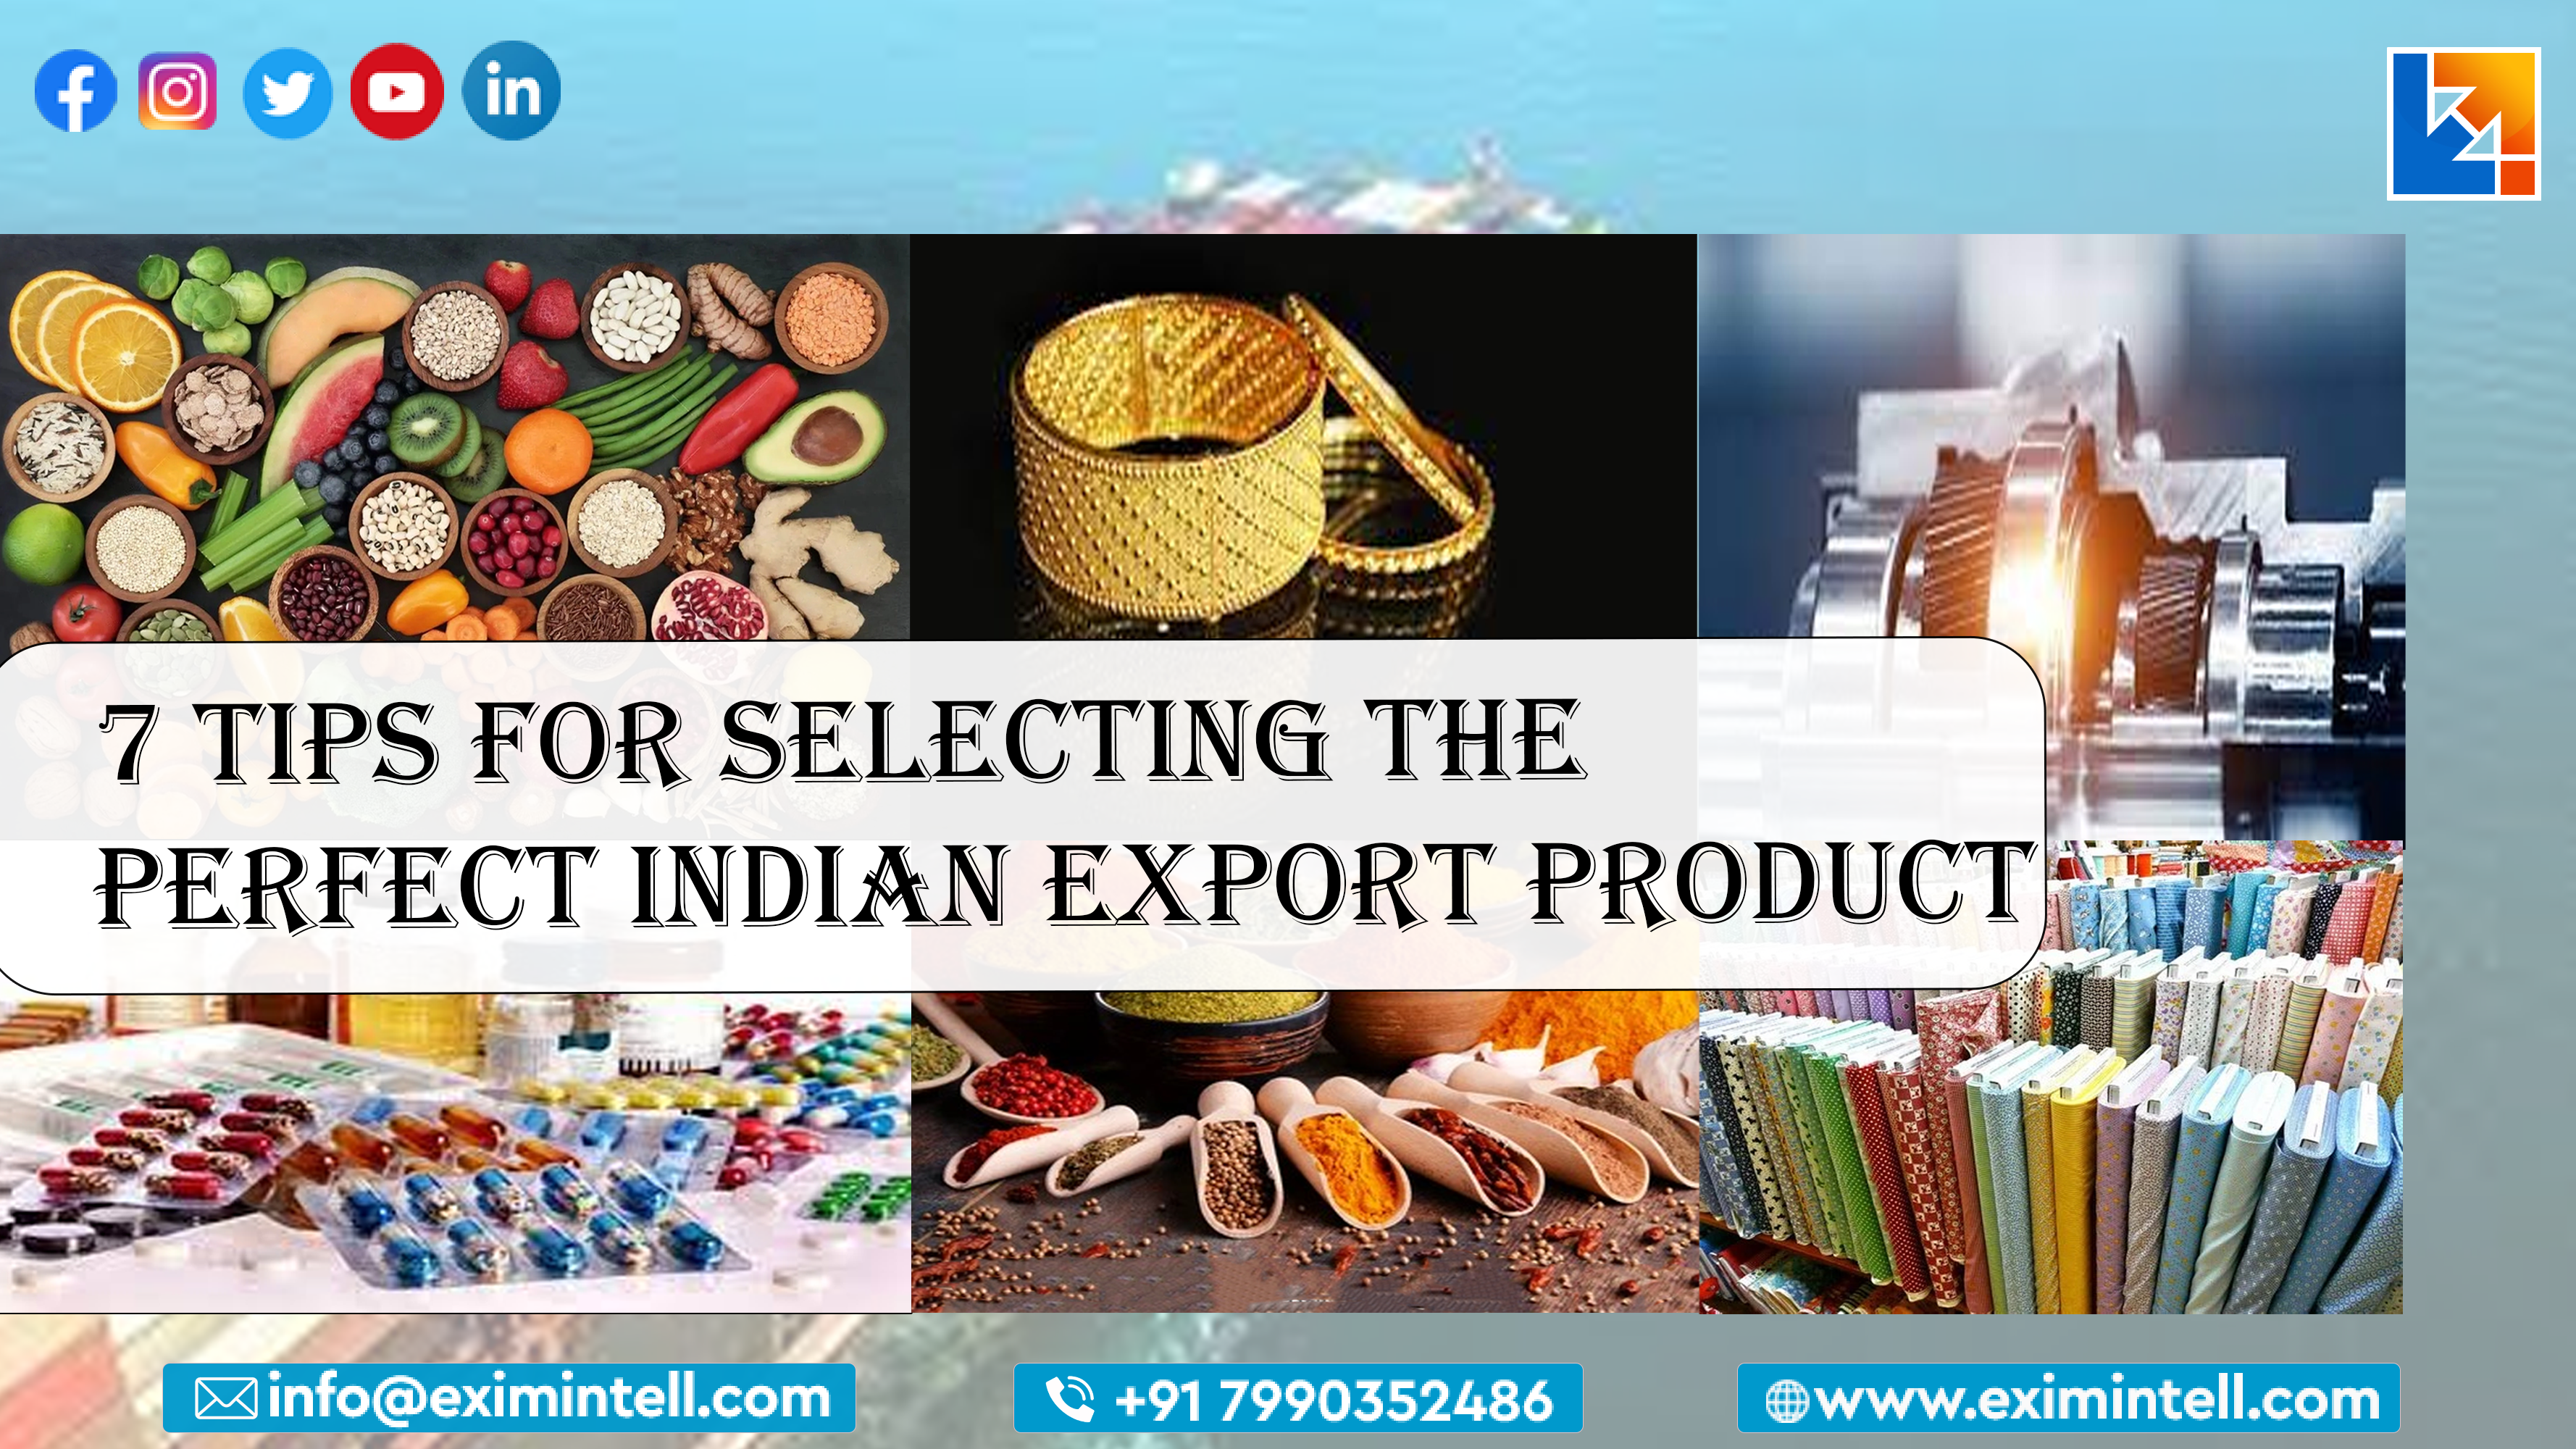 7 Tips for Selecting the Perfect Indian Export Product